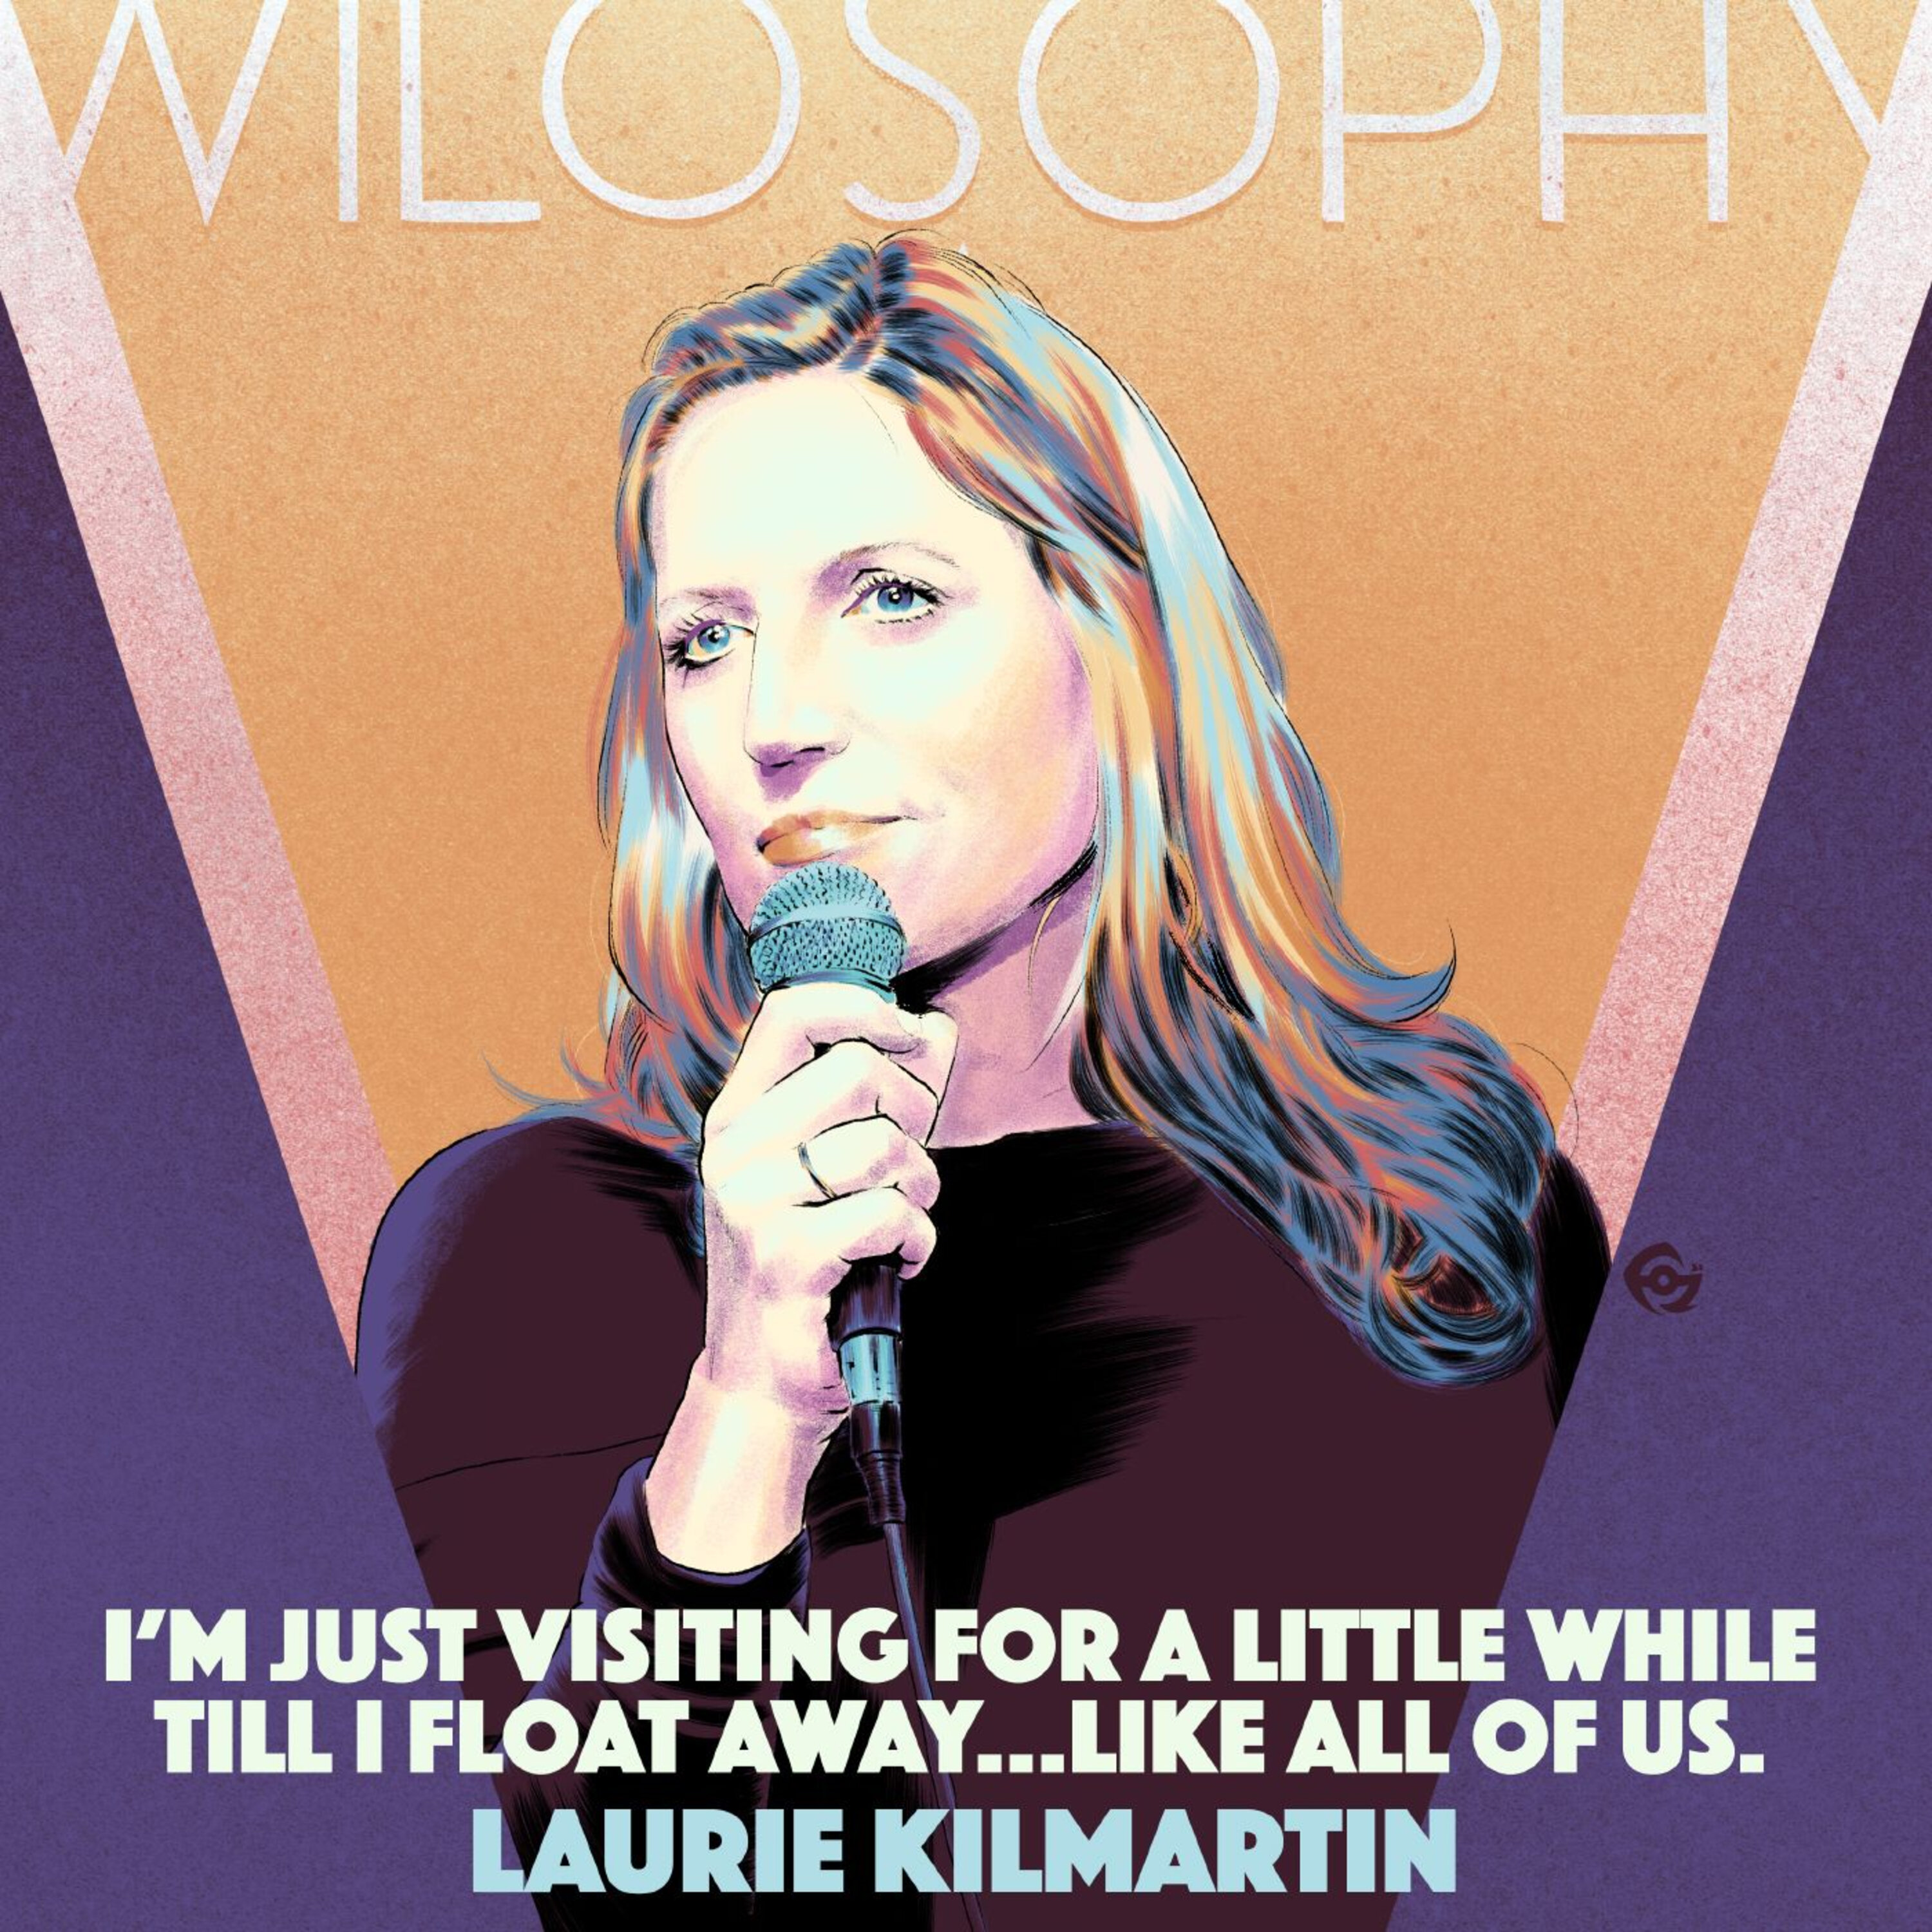 WILOSOPHY with Laurie Kilmartin